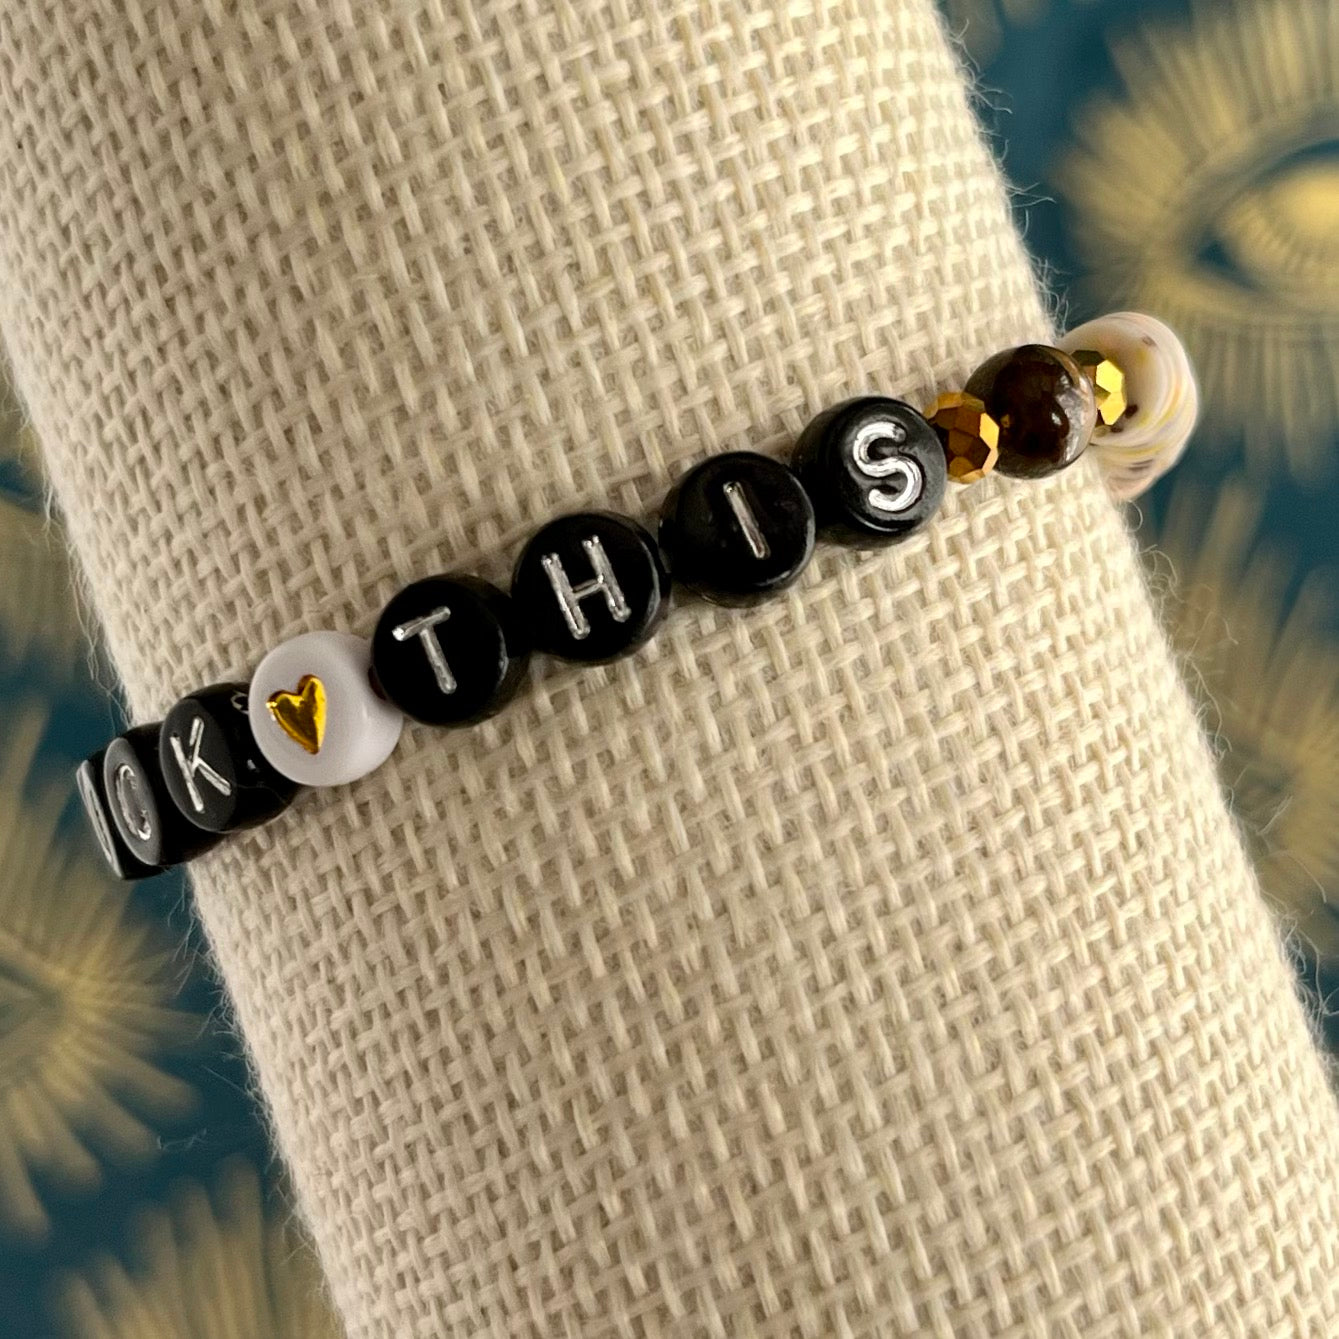 In Your Feelings Letter Bead Bracelets 'Fuck This' Black Silver Letters,  heart beads and tigers eye stone beads